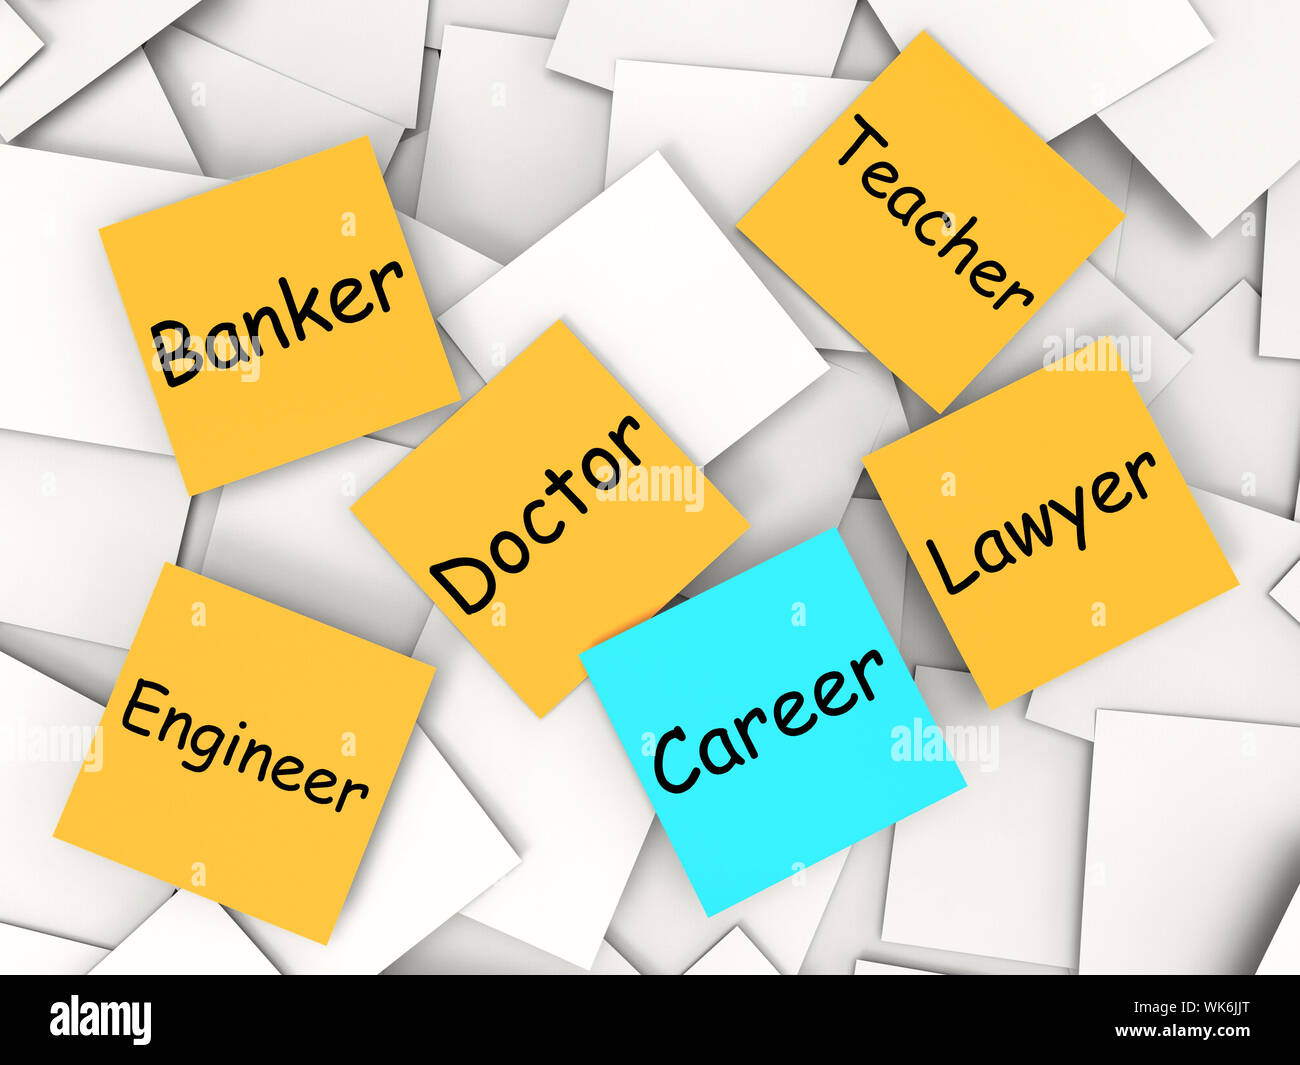 Career Post-It Note Meaning Occupation And Employment Stock Photo